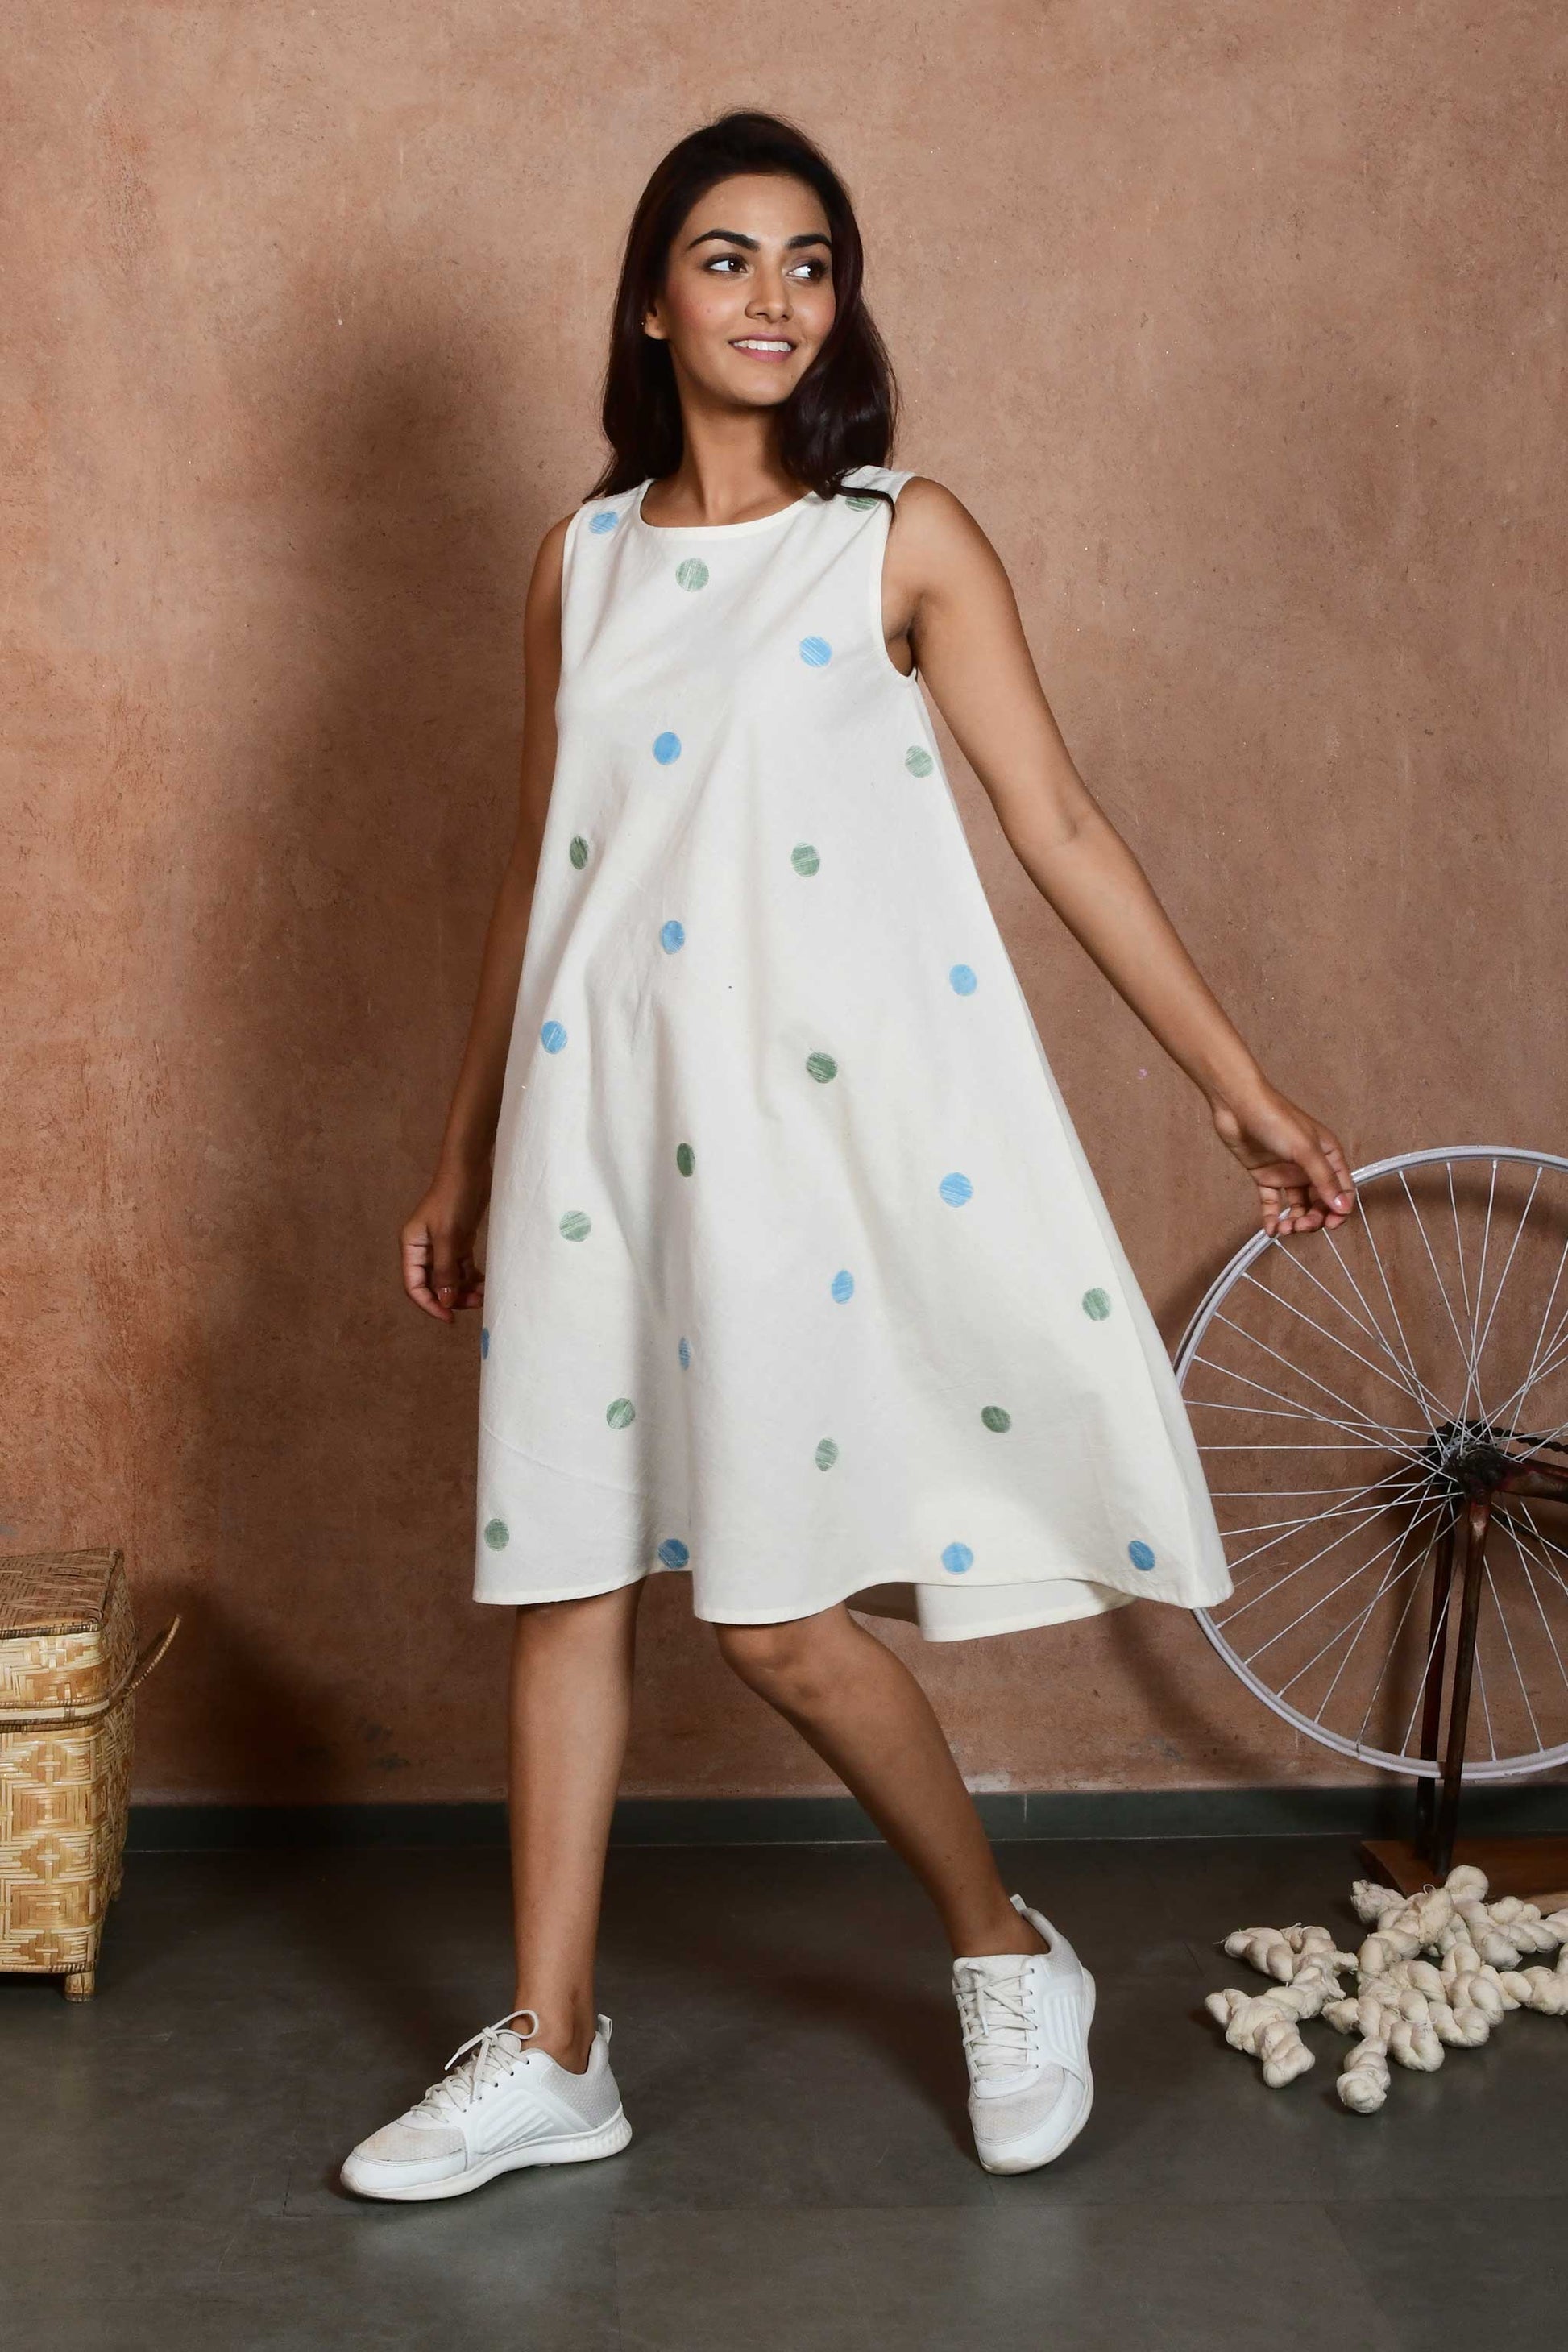 Side pose of an indian model wearing a handspun handloom cotton sleeveless dress that is knee length with green and blue polka dot patches.